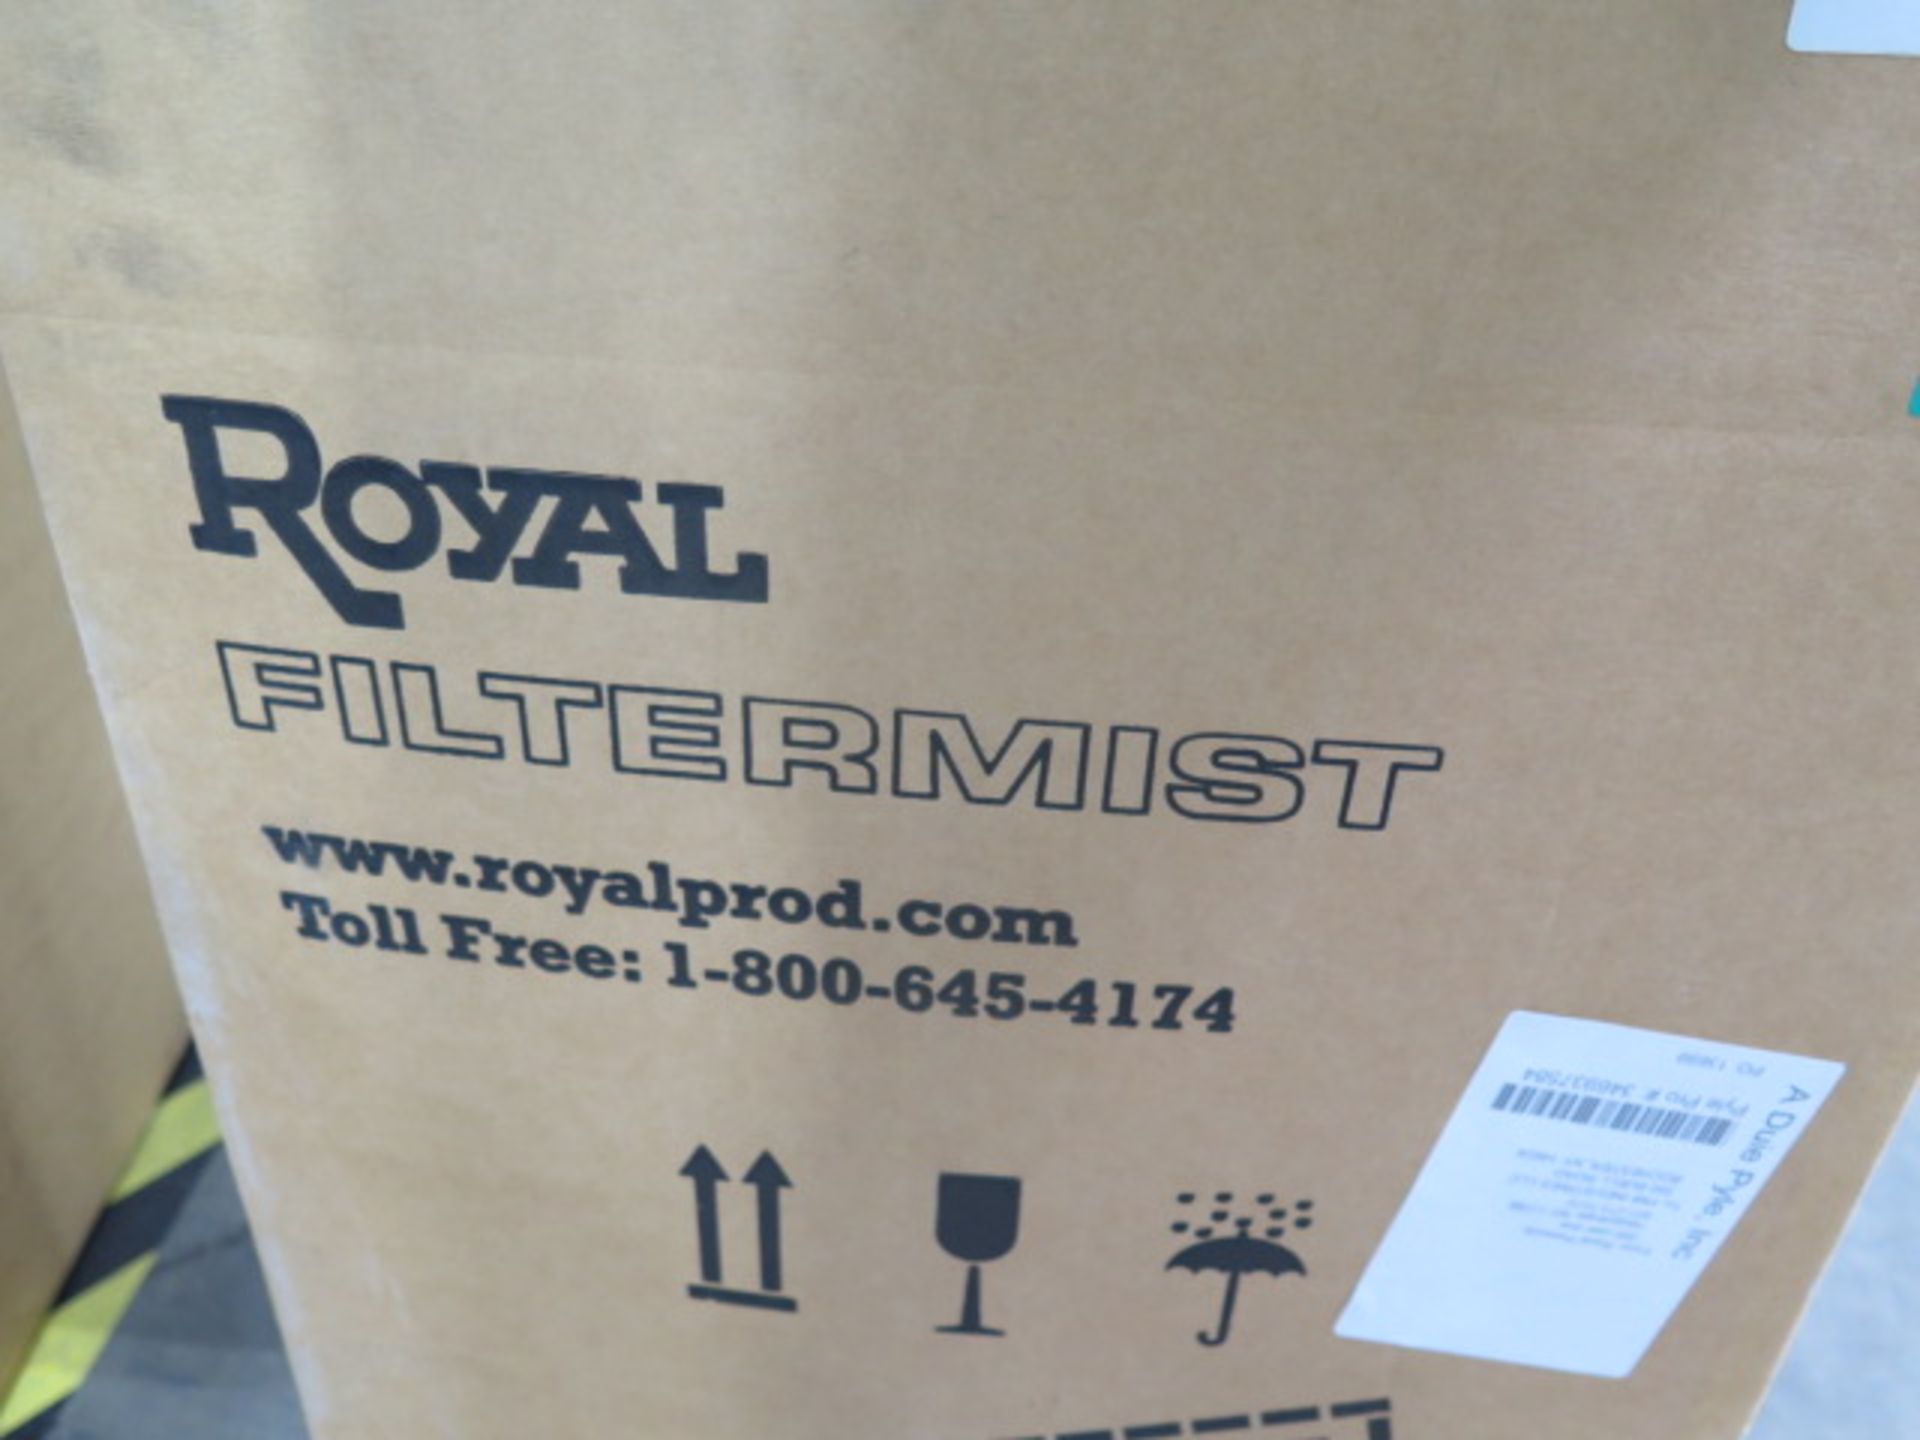 Royal FX-1200 "Filtermist" Unit (NEW) w/ Controls (SOLD AS-IS - NO WARRANTY) - Image 2 of 5